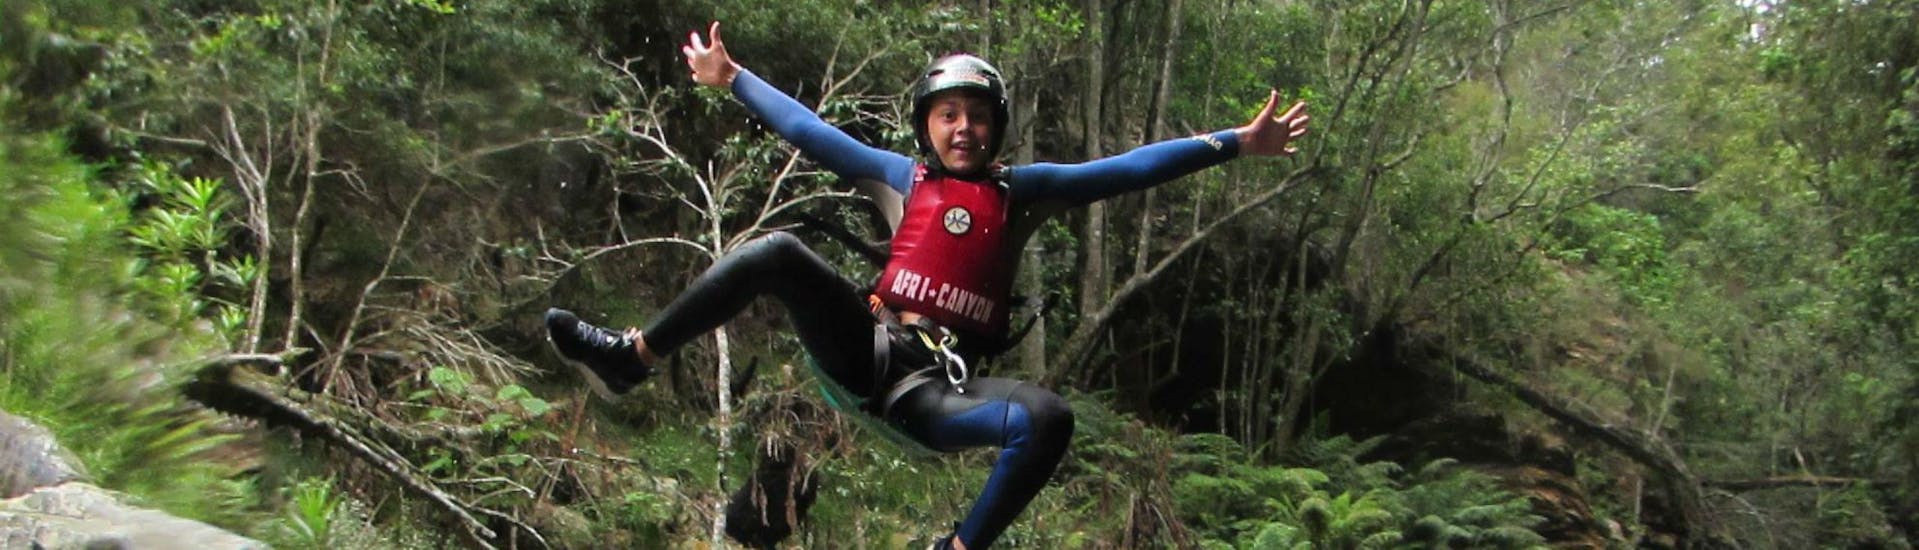 canyoning-in-the-crags-introductory-tour-africanyon-hero